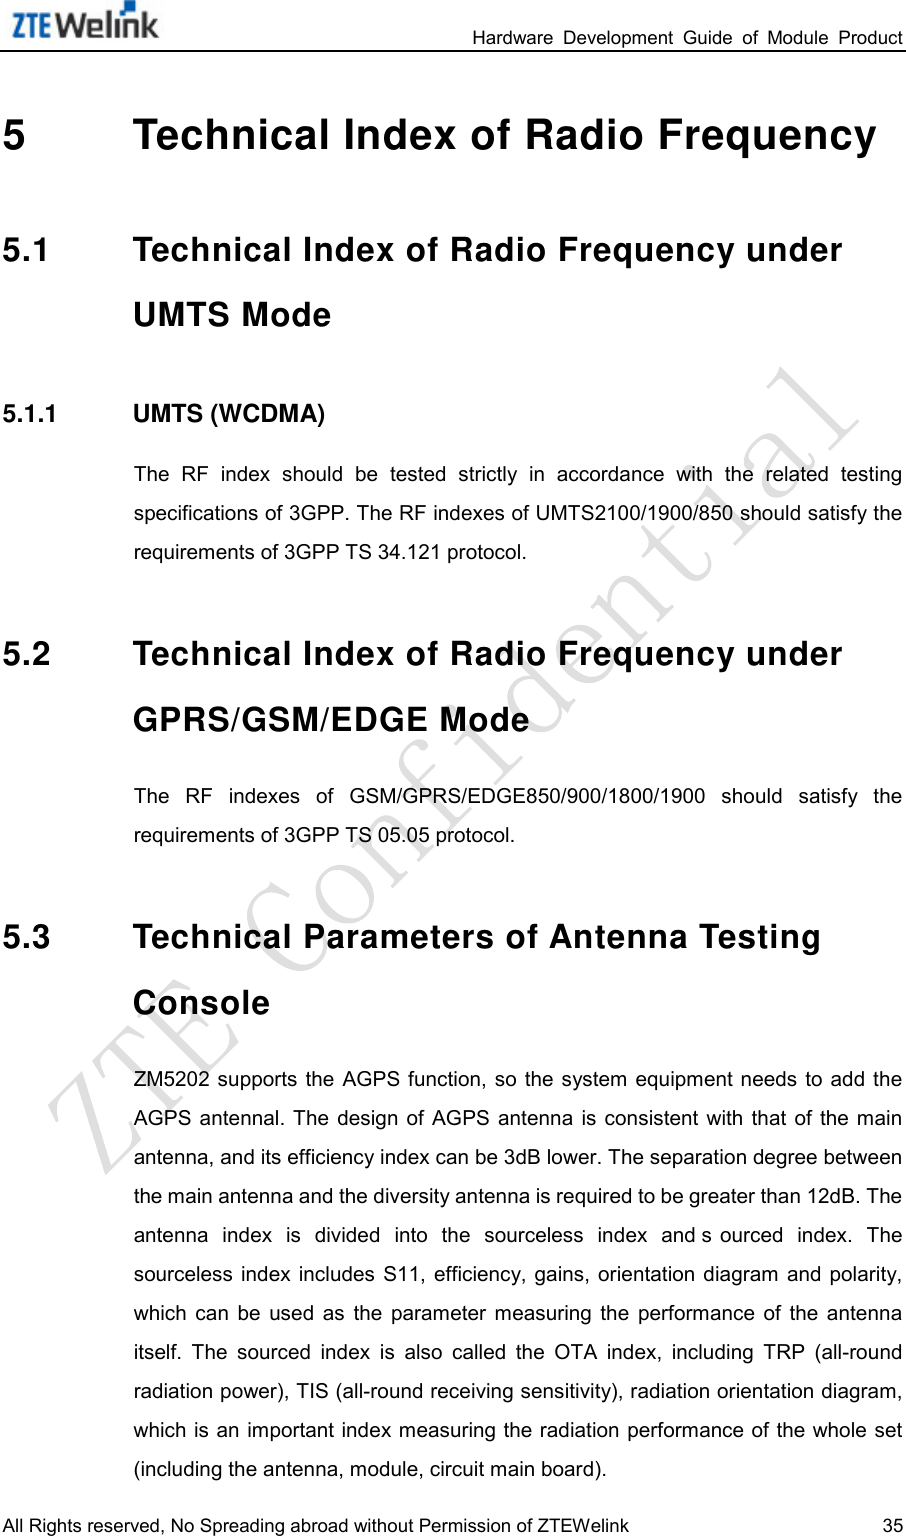                                                                 Hardware  Development  Guide  of  Module  Product All Rights reserved, No Spreading abroad without Permission of ZTEWelink 35 5  Technical Index of Radio Frequency 5.1 Technical Index of Radio Frequency under UMTS Mode 5.1.1 UMTS (WCDMA) The  RF  index  should  be  tested  strictly  in  accordance  with  the  related  testing specifications of 3GPP. The RF indexes of UMTS2100/1900/850 should satisfy the requirements of 3GPP TS 34.121 protocol.   5.2 Technical Index of Radio Frequency under GPRS/GSM/EDGE Mode The  RF  indexes  of  GSM/GPRS/EDGE850/900/1800/1900 should  satisfy  the requirements of 3GPP TS 05.05 protocol.   5.3 Technical Parameters of Antenna Testing Console   ZM5202 supports the  AGPS function, so  the system  equipment needs  to add the AGPS  antennal. The  design  of AGPS  antenna  is  consistent  with  that  of  the main antenna, and its efficiency index can be 3dB lower. The separation degree between the main antenna and the diversity antenna is required to be greater than 12dB. The antenna  index  is  divided  into  the  sourceless  index  and s ourced  index.  The sourceless index includes  S11,  efficiency, gains, orientation diagram and polarity, which  can  be  used  as  the  parameter  measuring  the  performance  of  the  antenna itself.  The  sourced  index  is  also  called  the  OTA  index,  including  TRP  (all-round radiation power), TIS (all-round receiving sensitivity), radiation orientation diagram, which is an important index measuring the radiation performance of the whole set (including the antenna, module, circuit main board).   